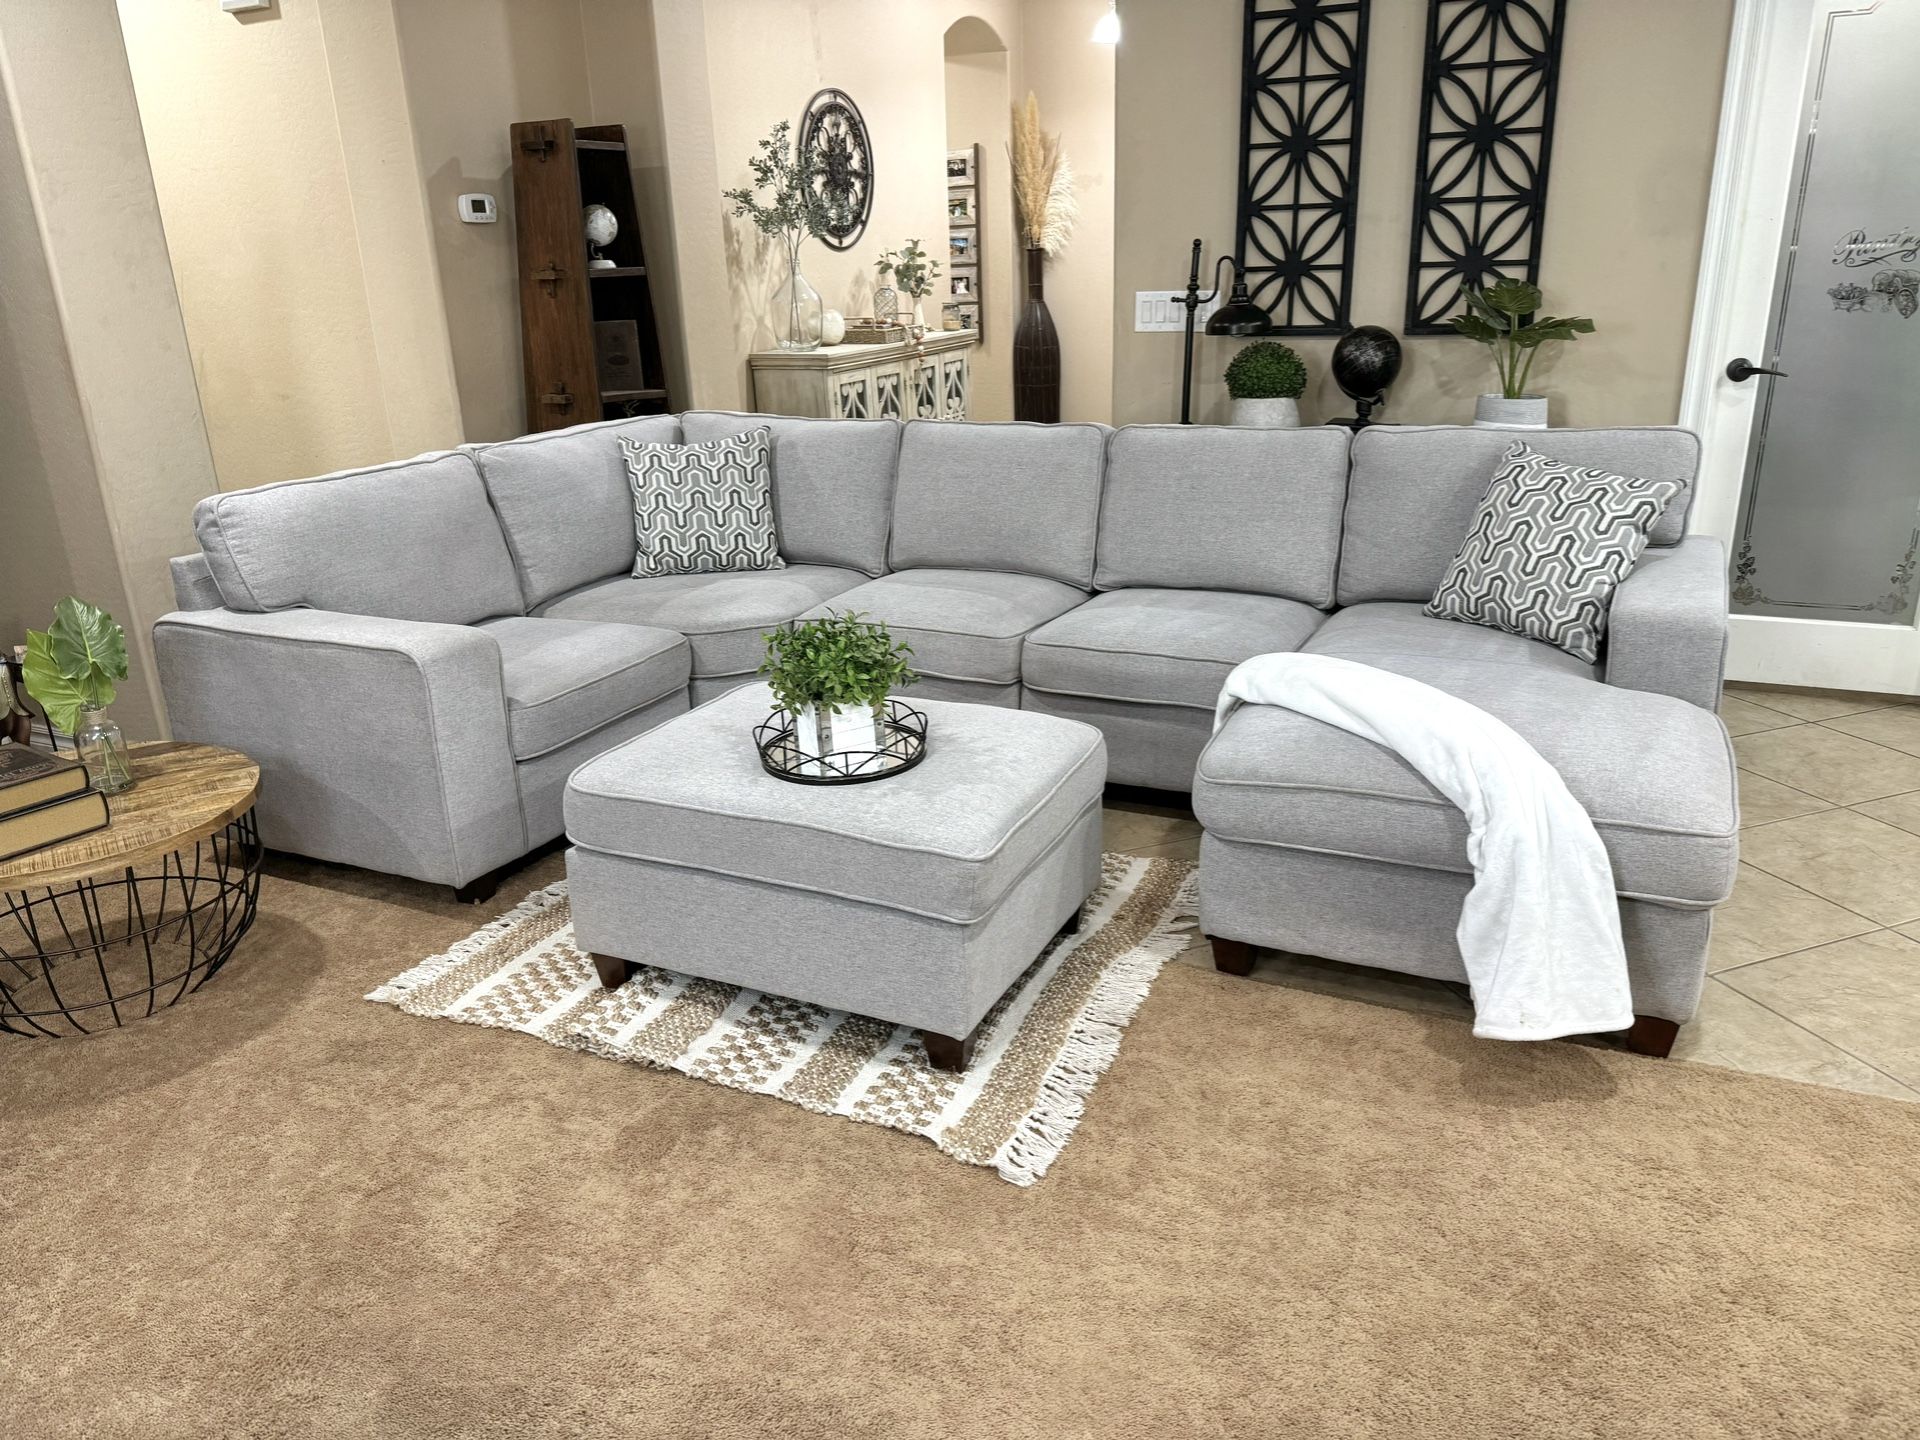 Grey Sectional Couch w/ Matching Ottoman 